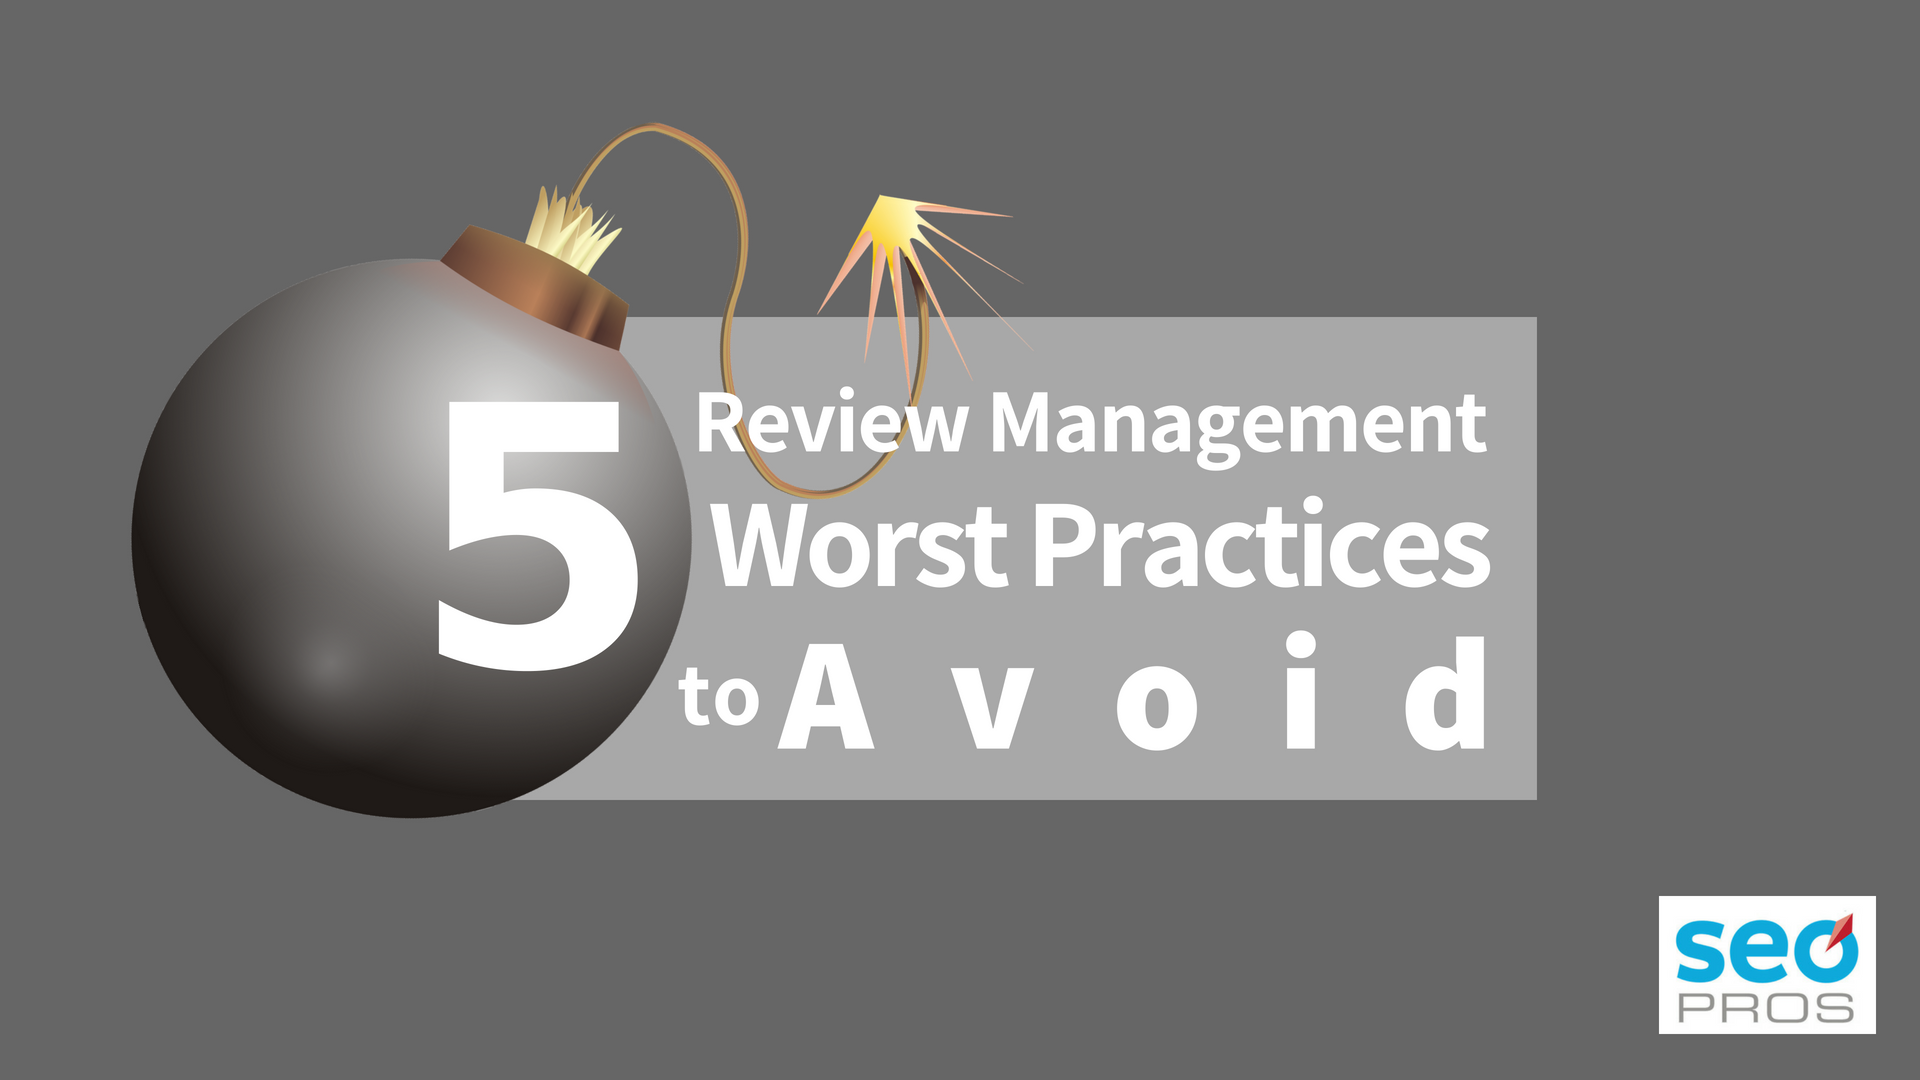 Self-Destructive Review Management Worst Practices to Avoid (1)